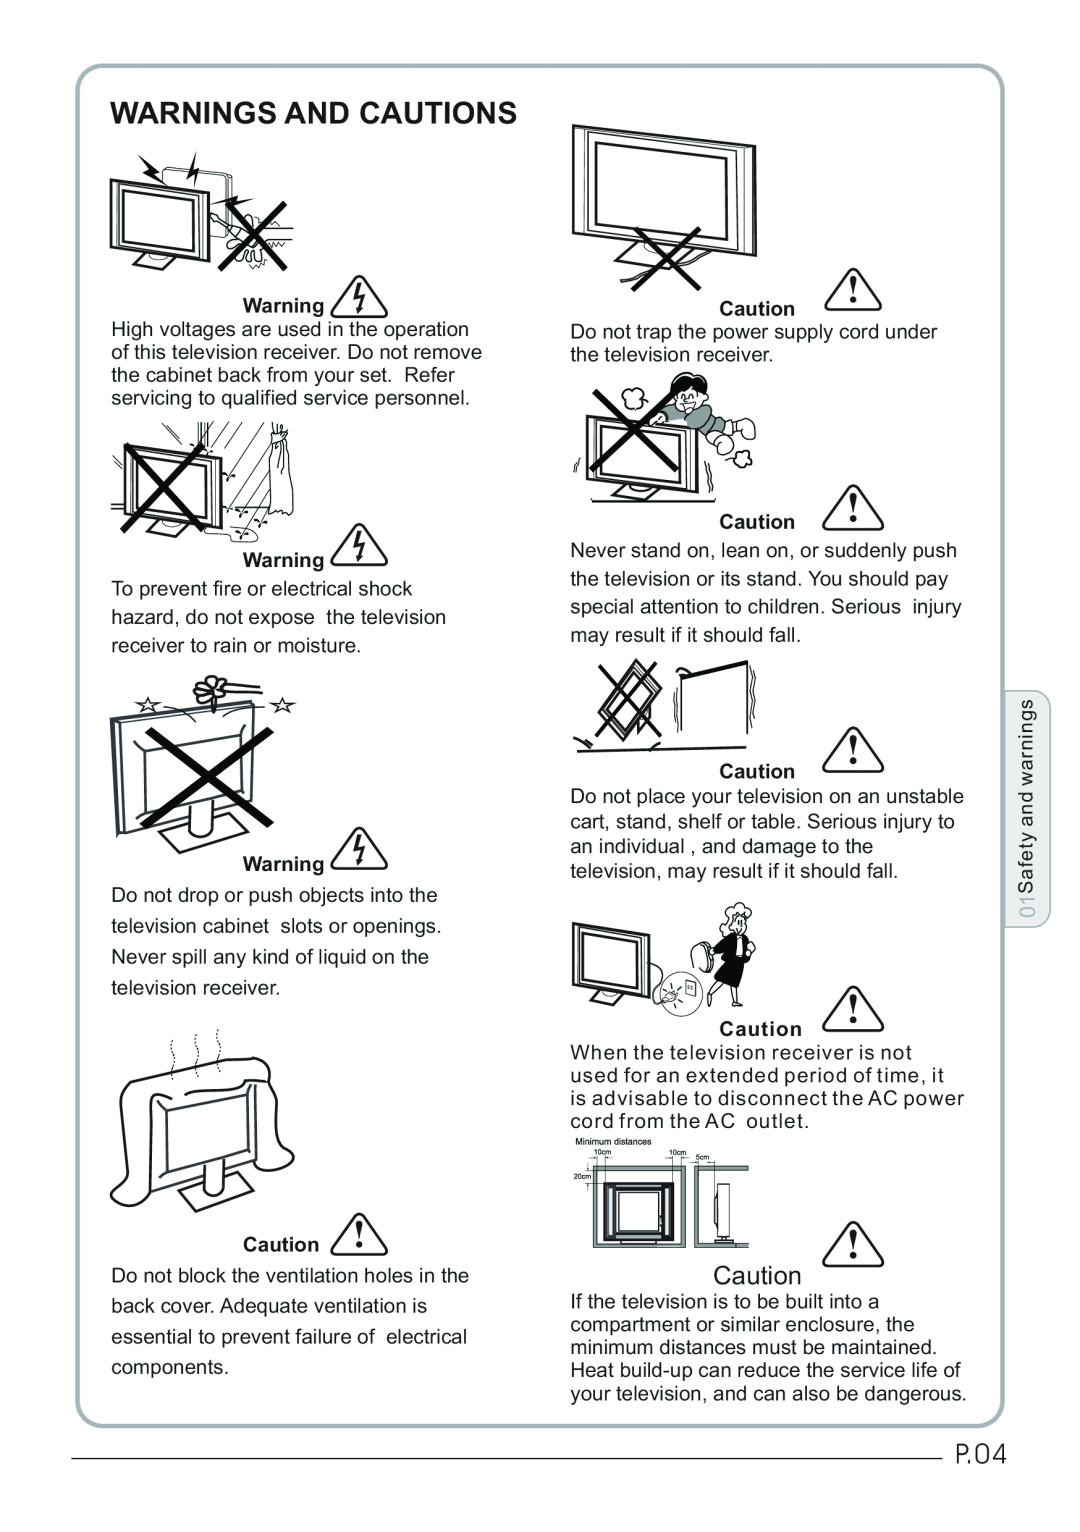 Haier LET32C430, LET26C430 user manual Warnings And Cautions, P.04 